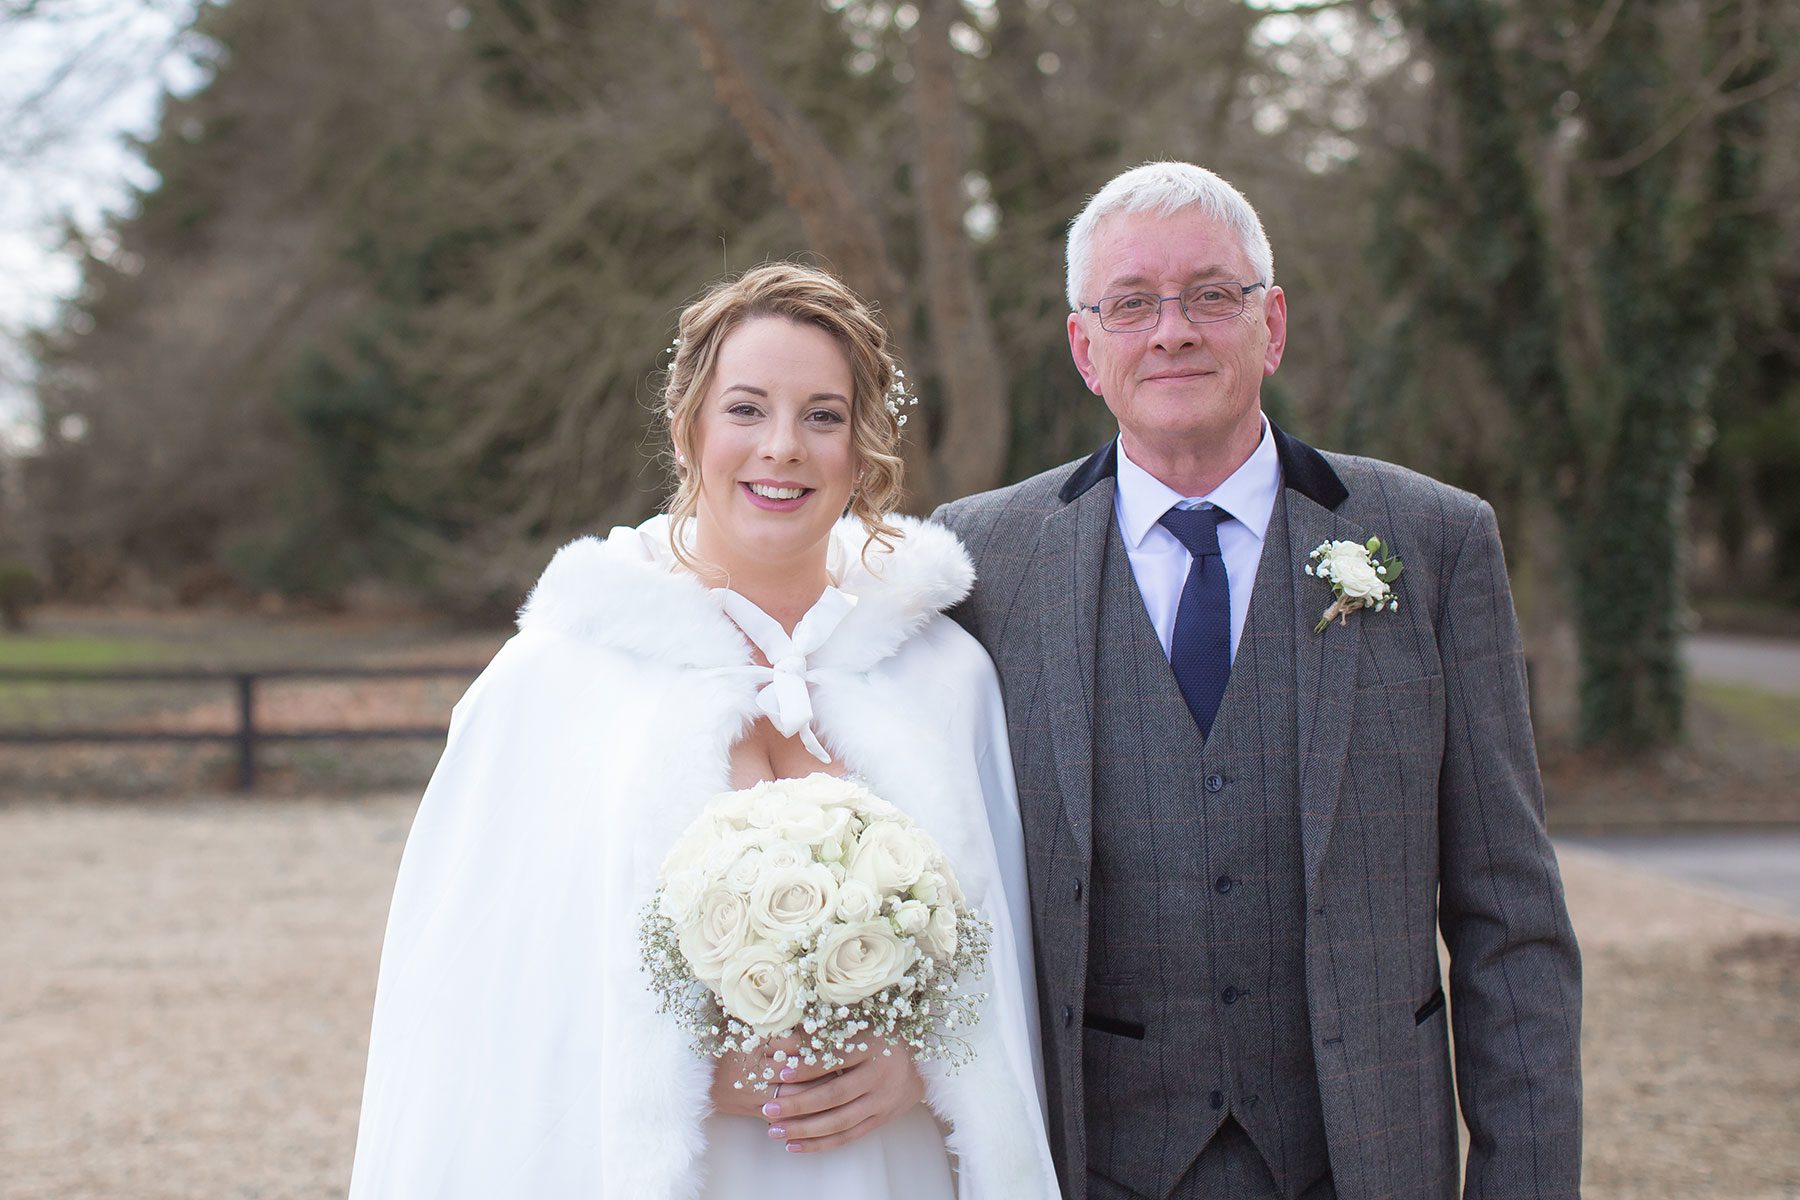 Wedding Photographer, Photography in Cheltenham, the Cotswolds and the surrounding areas.